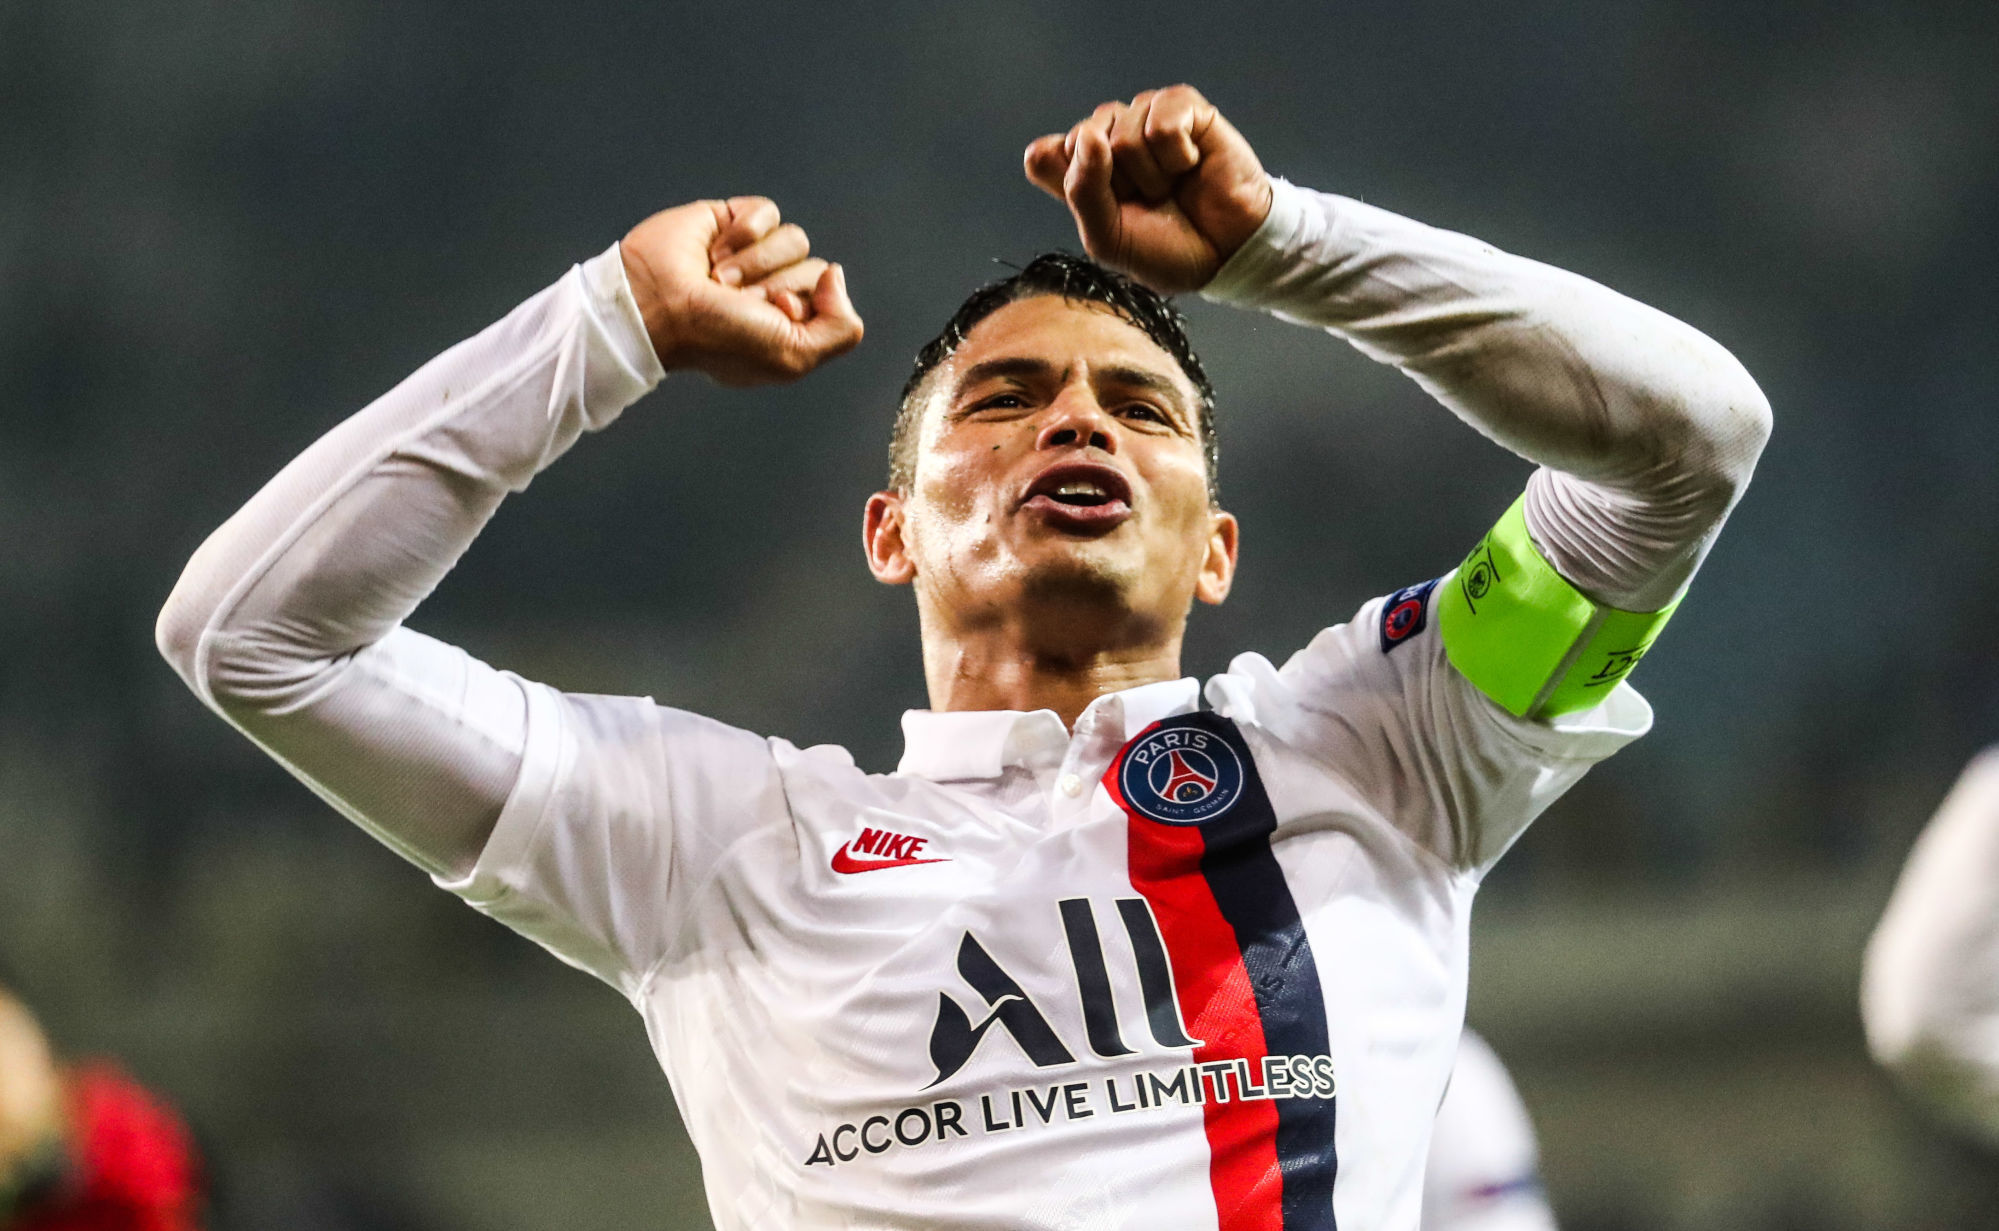 PSG's captain Thiago Silva celebrates after winning a soccer game between Belgian team Club Brugge KSV and French club Paris Saint-Germain, Tuesday 22 October 2019 in Brugge, match 3/6 in the group stage of the UEFA Champions League, in Group A. BELGA PHOTO VIRGINIE LEFOUR 

Photo by Icon Sport - Thiago SILVA - Jan Breydel Stadium - Bruges (Belgique)